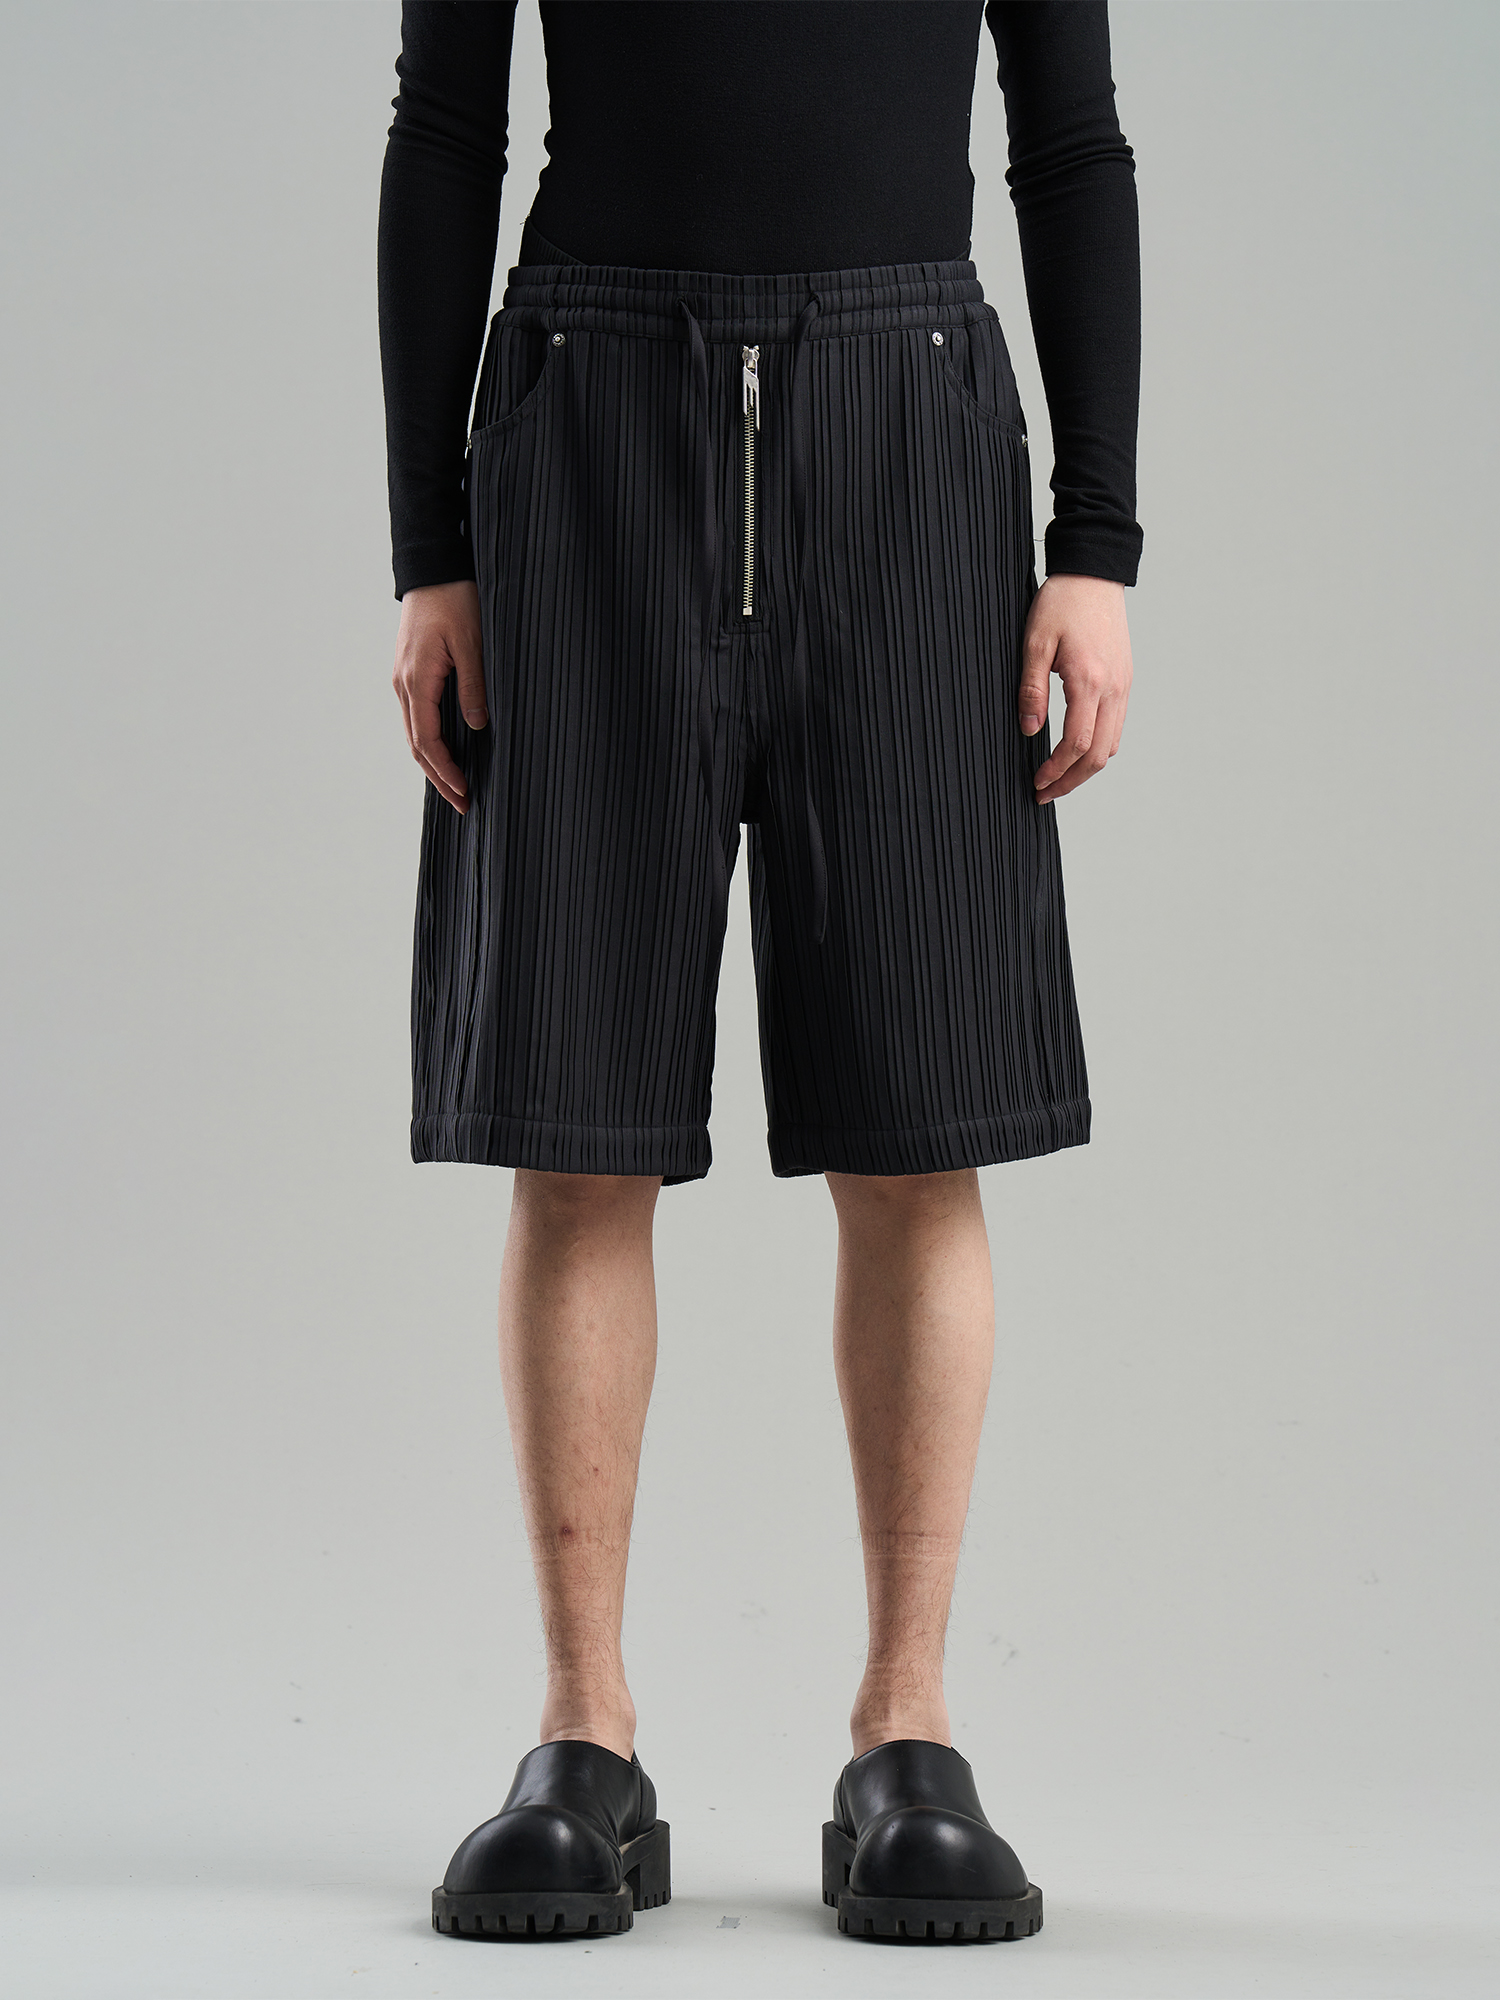 BLINDNOPLAN 23SS TEXTURED STRAIGHT-CUT SUIT SHORTS